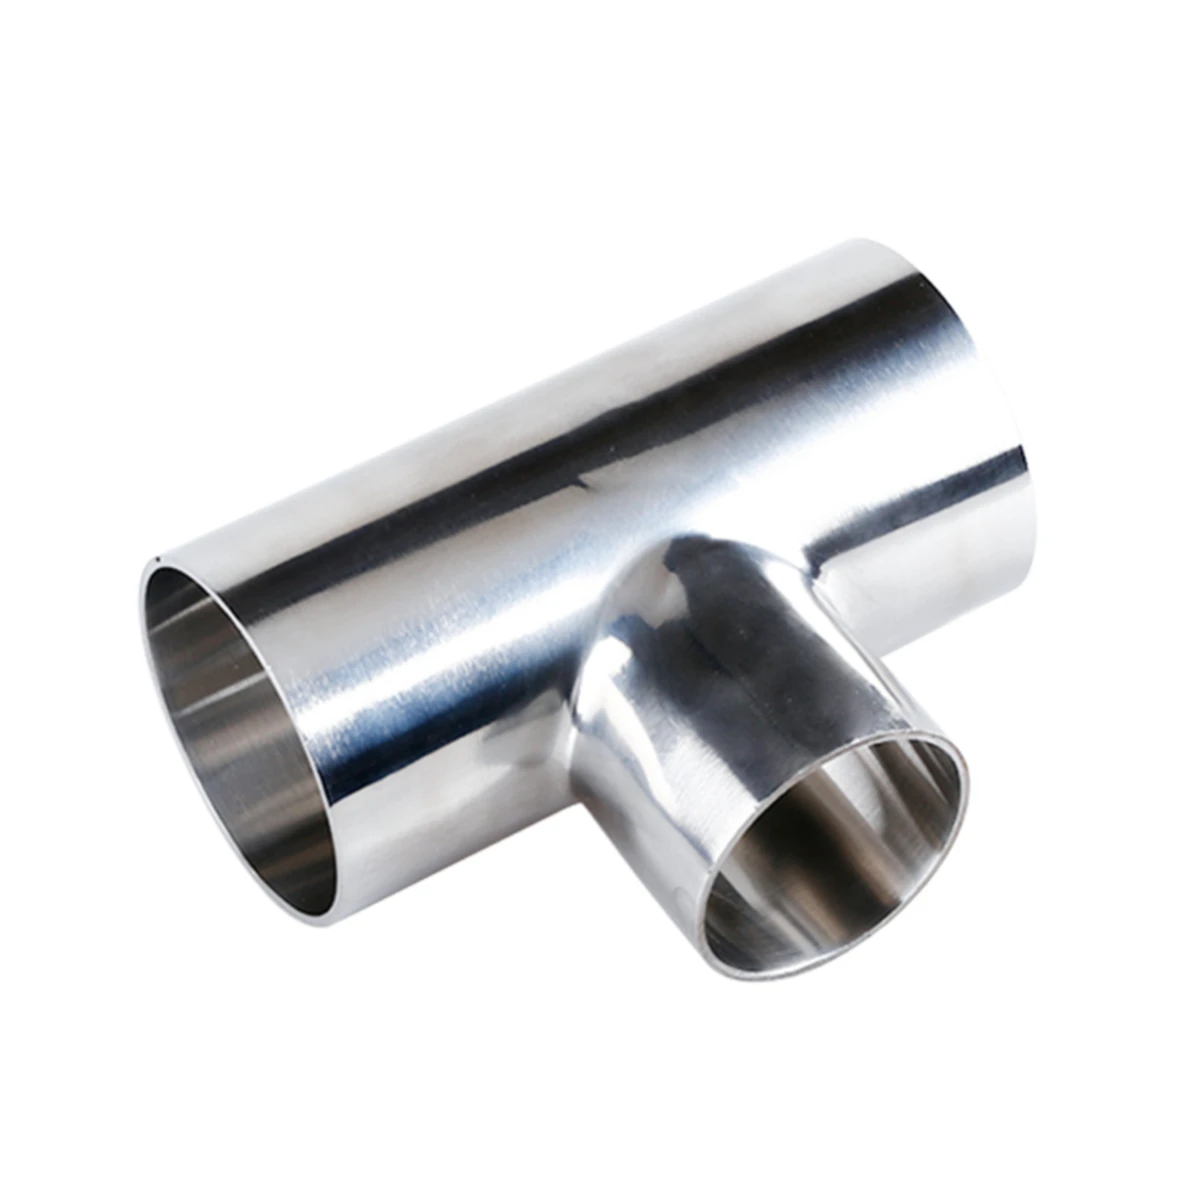 

1-3/4" X 1" Stainless Steel 304 Welding OD 45 X 25mm Sanitary Reducer Tee 3 Way Pipe Fitting